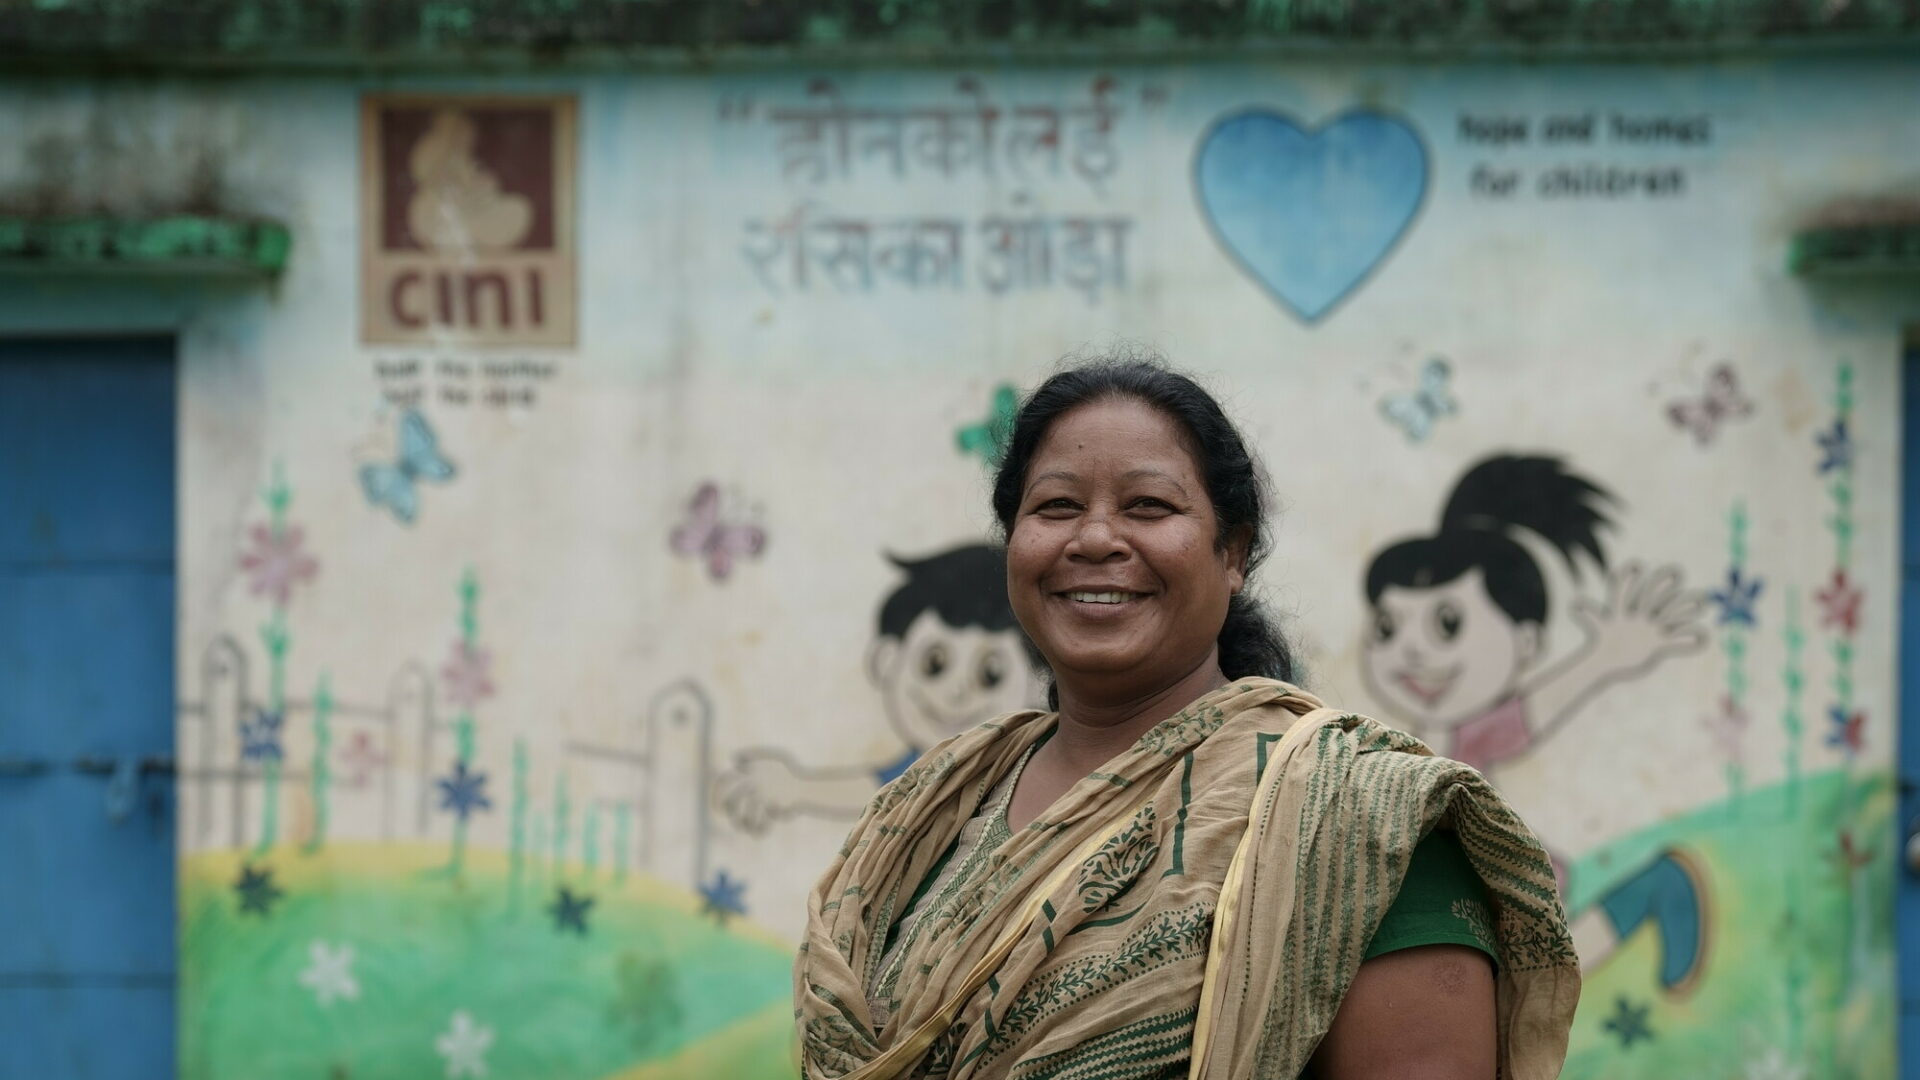 Indian woman standing smiling in front of colourful wall mural